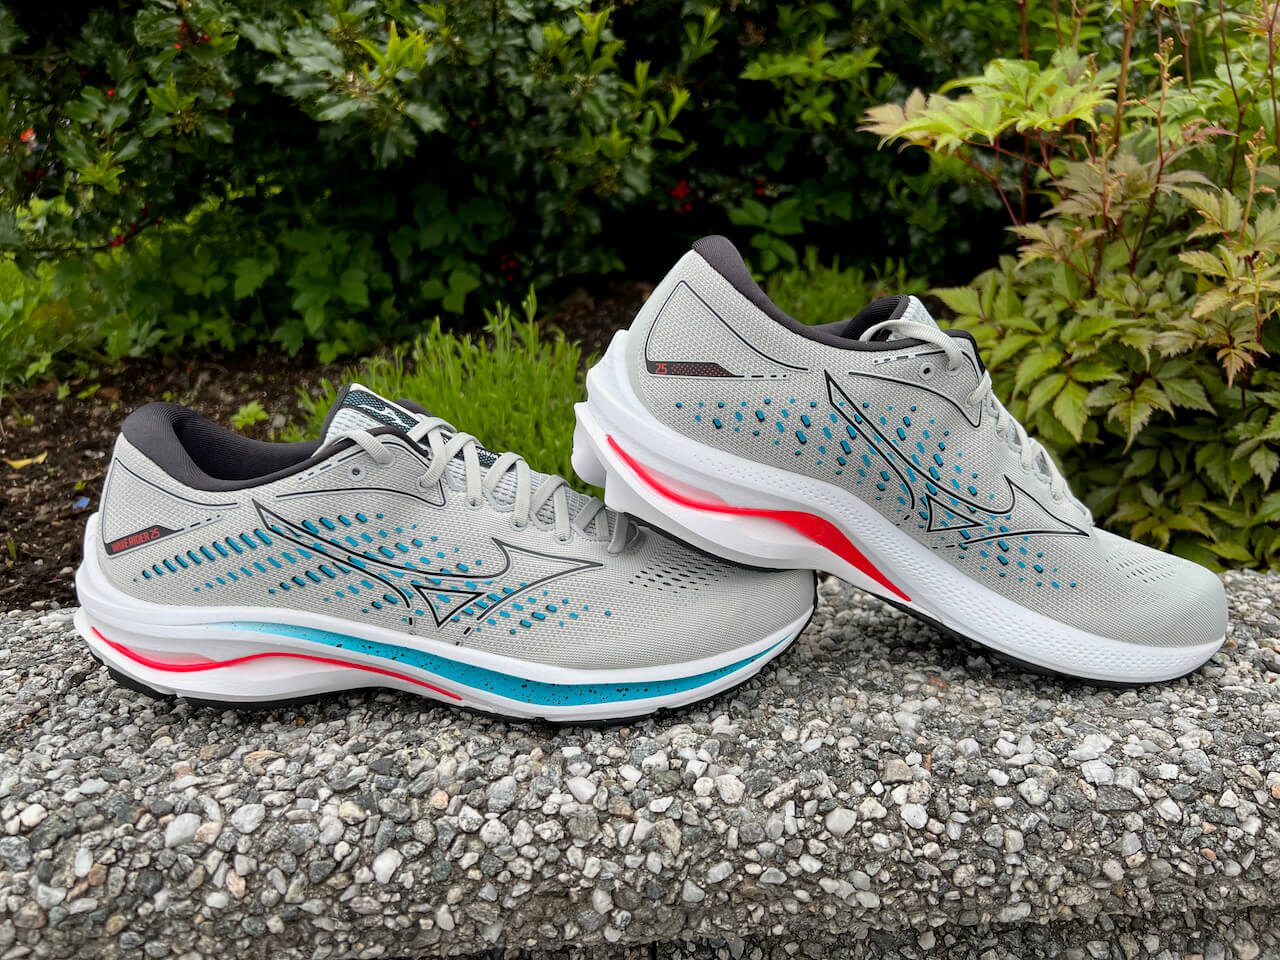 Featured image for “Test: Mizuno Wave Rider 25”